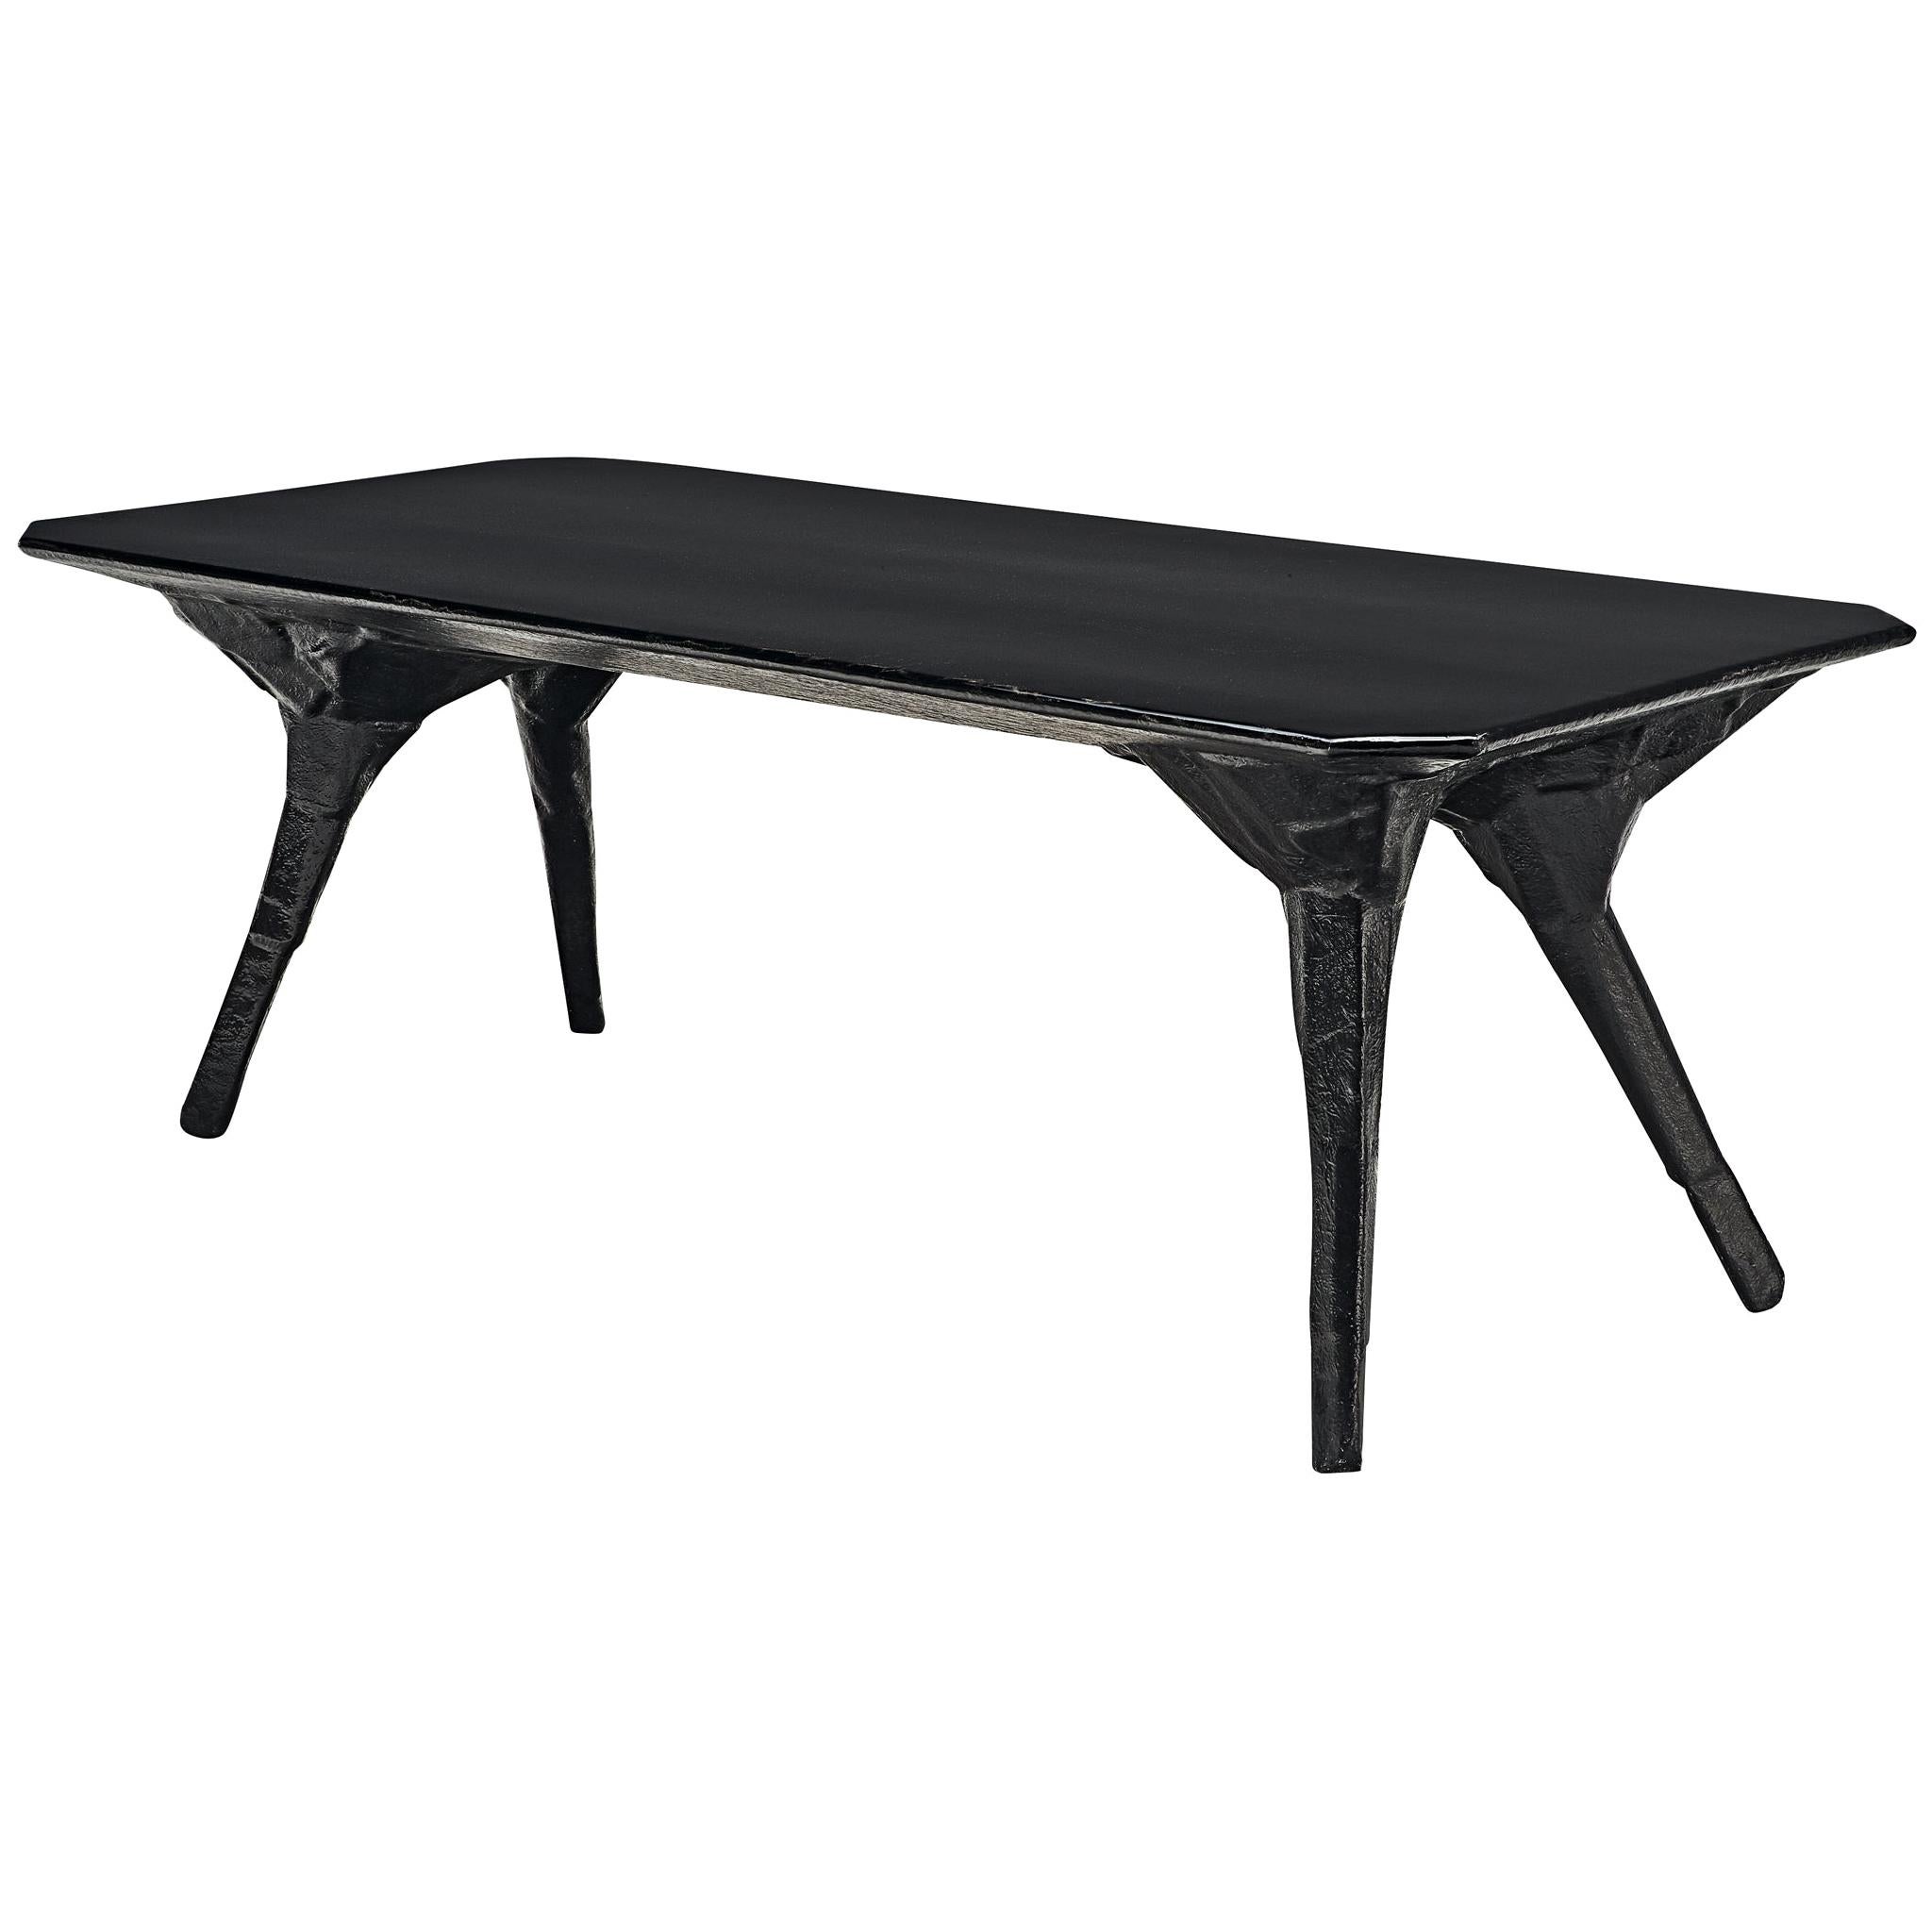 El Ultimo Grito Dining Table with Sculptural Legs